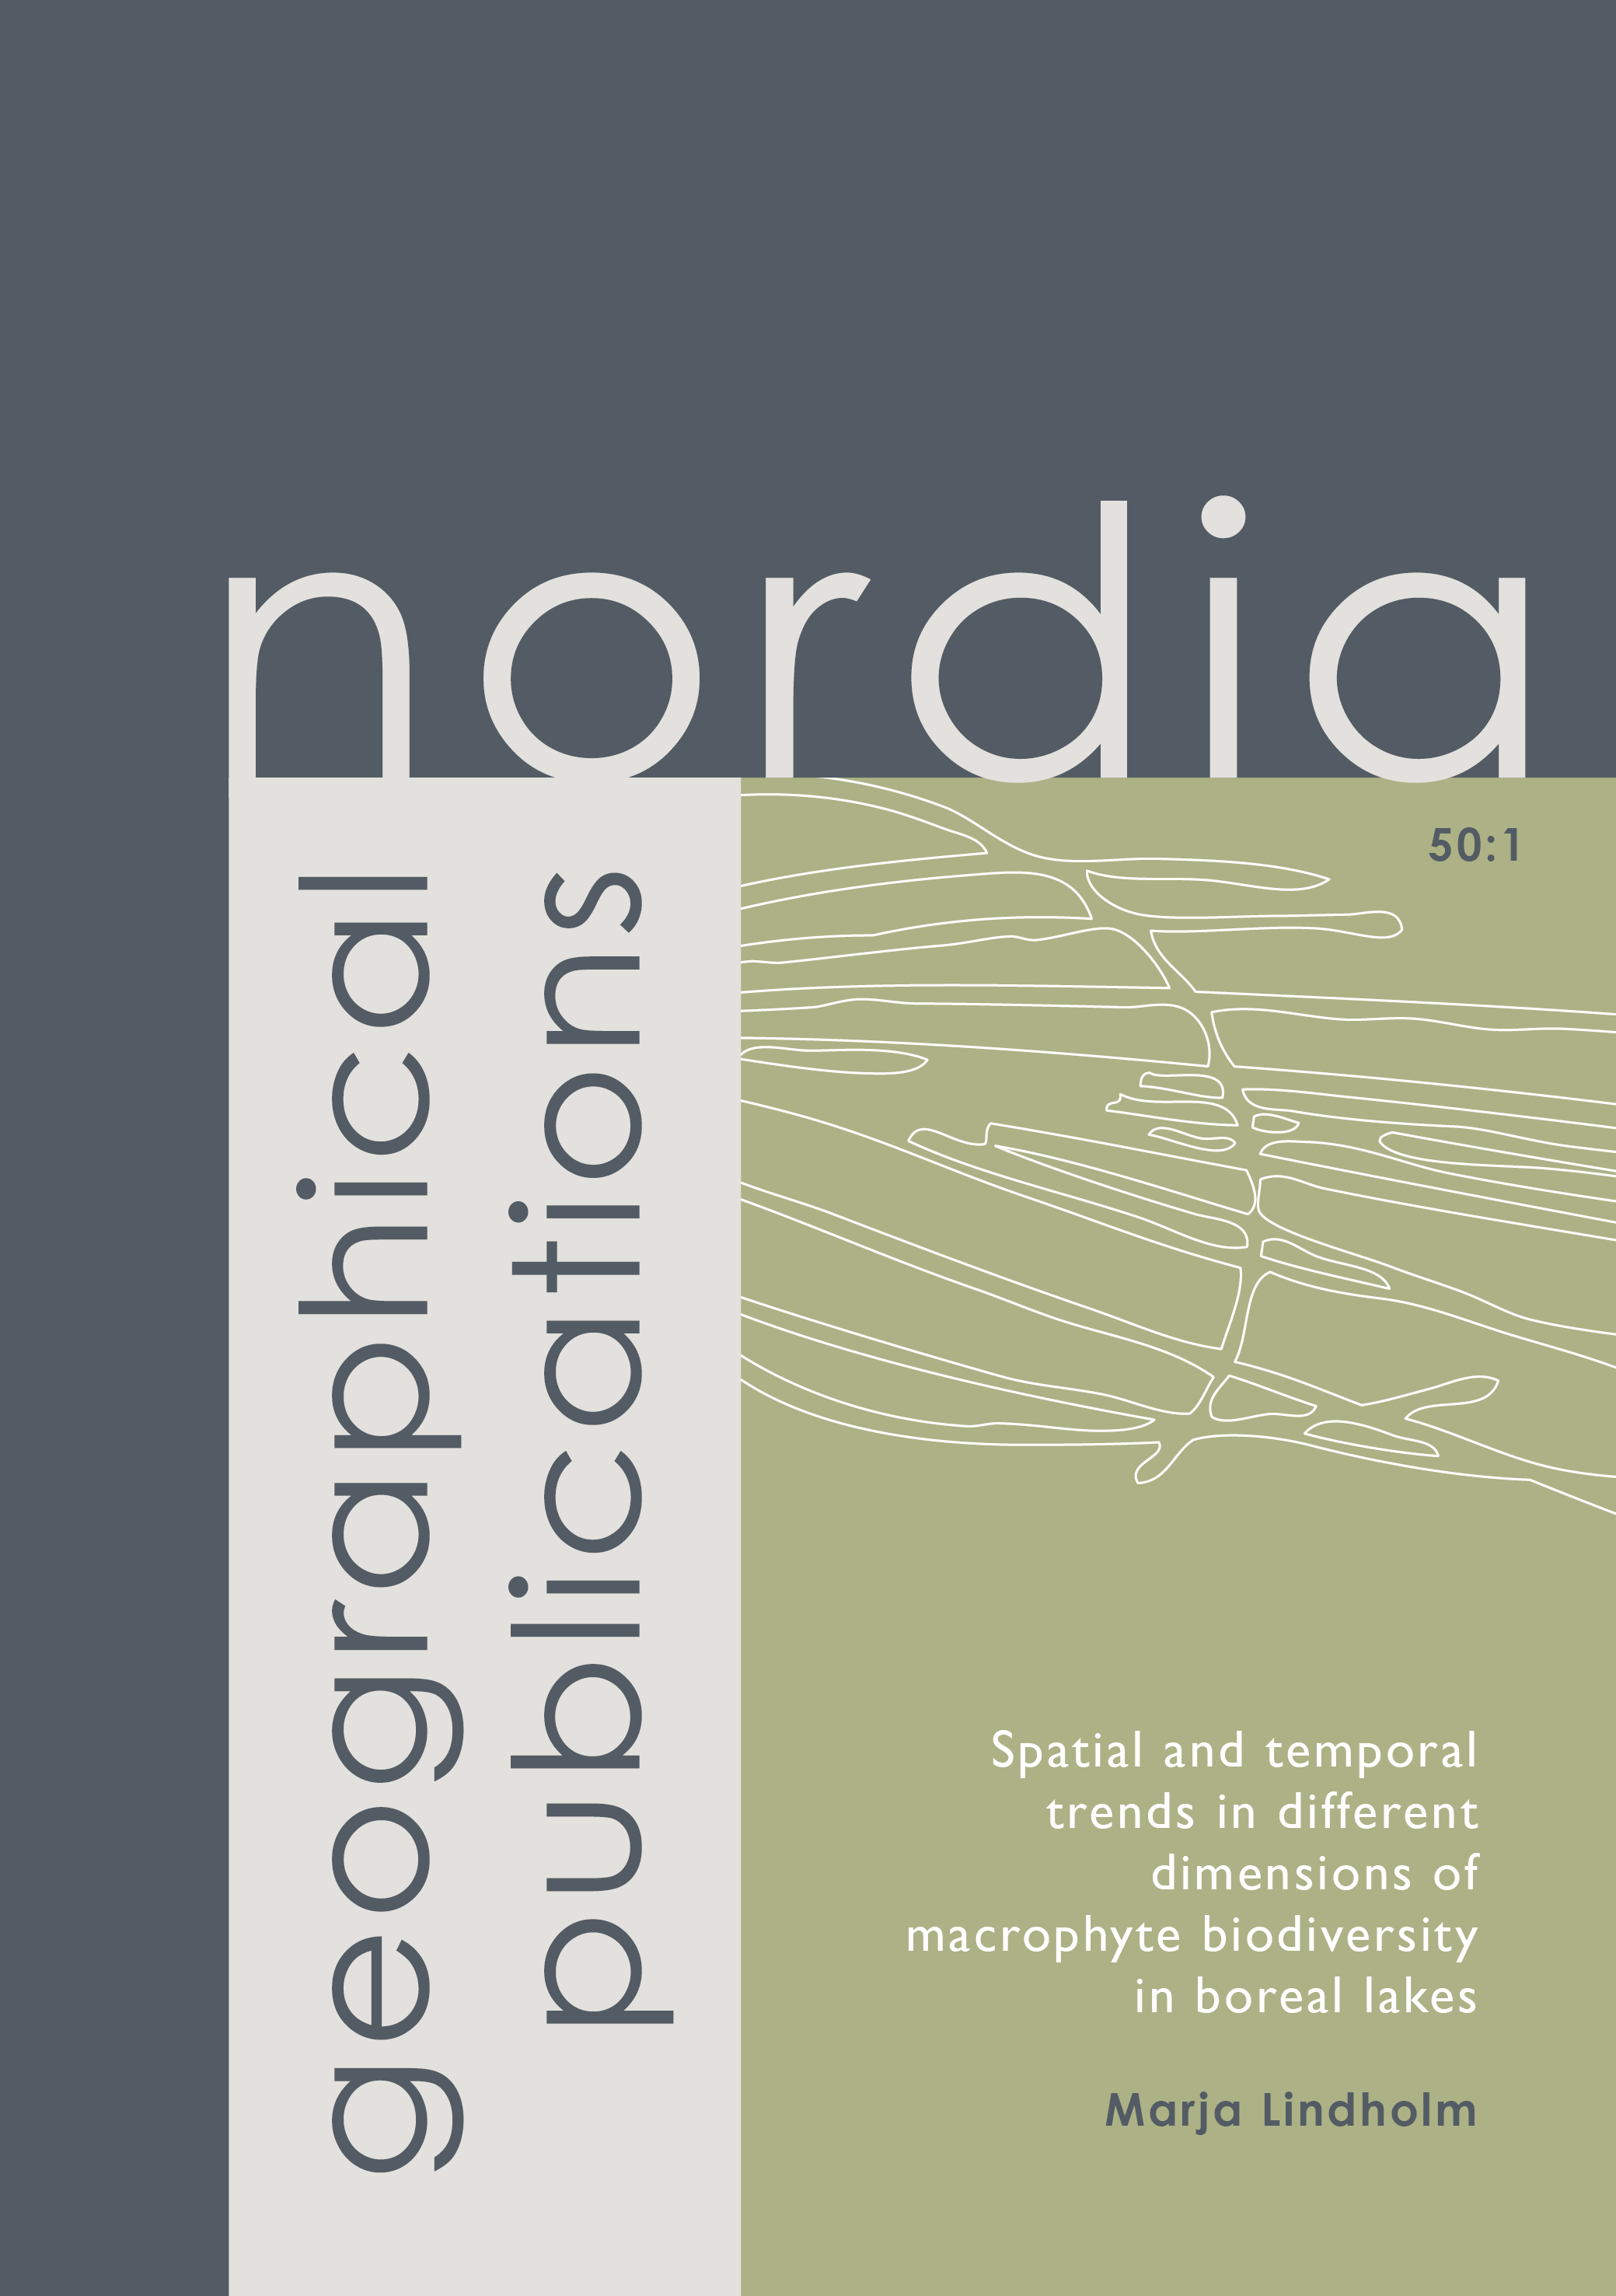 					View Vol. 50 No. 1 (2021): Spatial and temporal trends in different dimensions of macrophyte biodiversity in boreal lakes
				